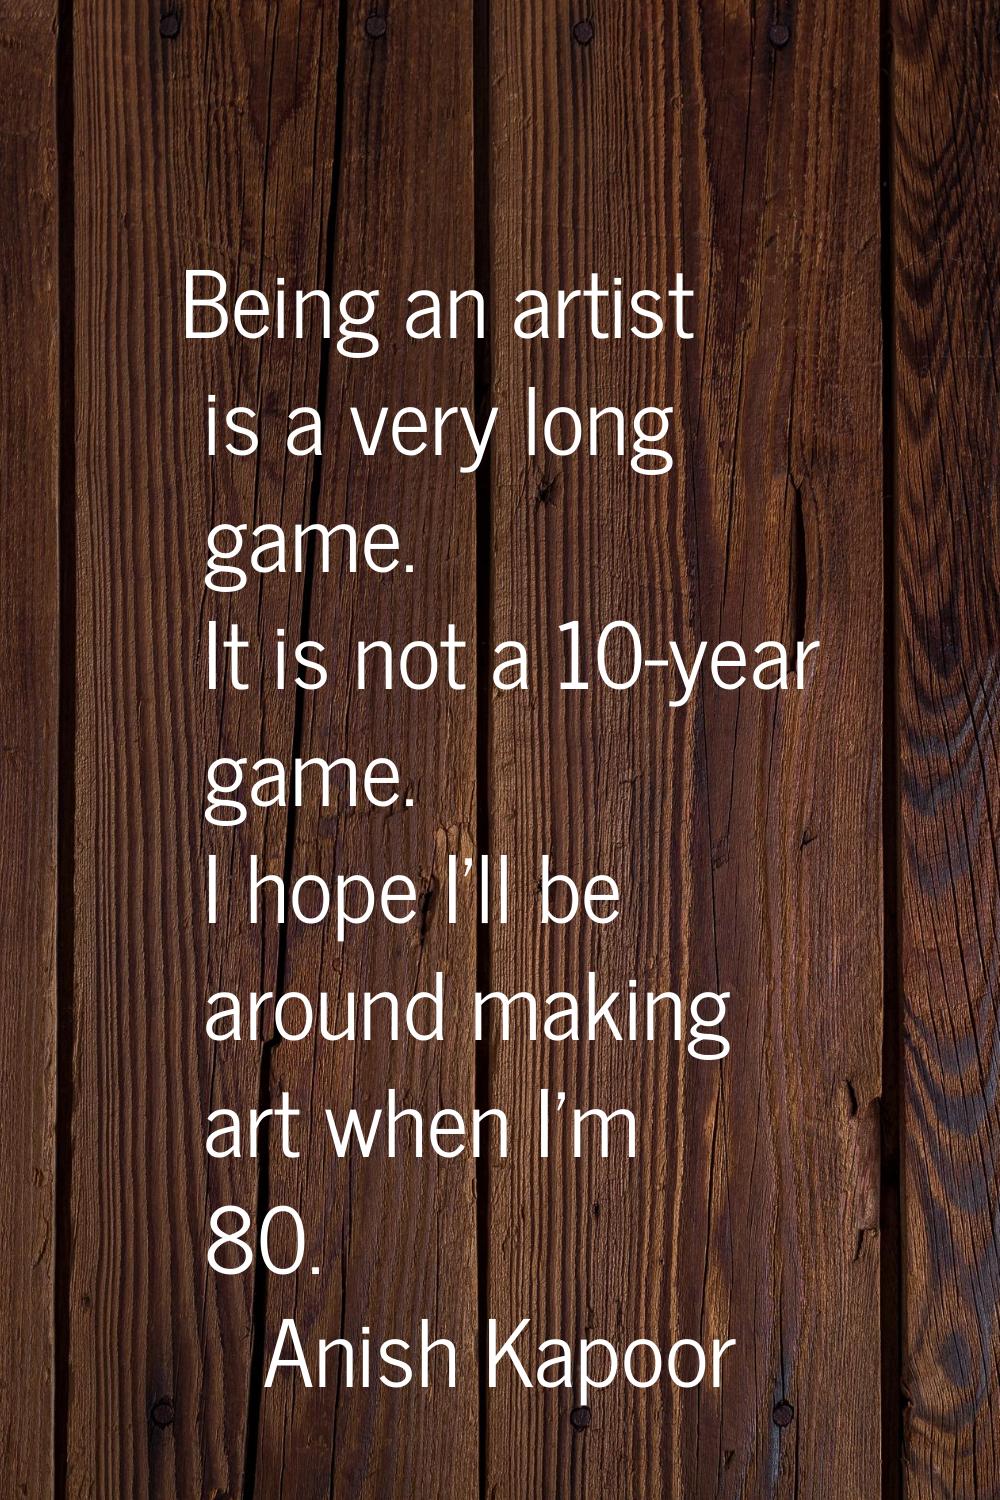 Being an artist is a very long game. It is not a 10-year game. I hope I'll be around making art whe